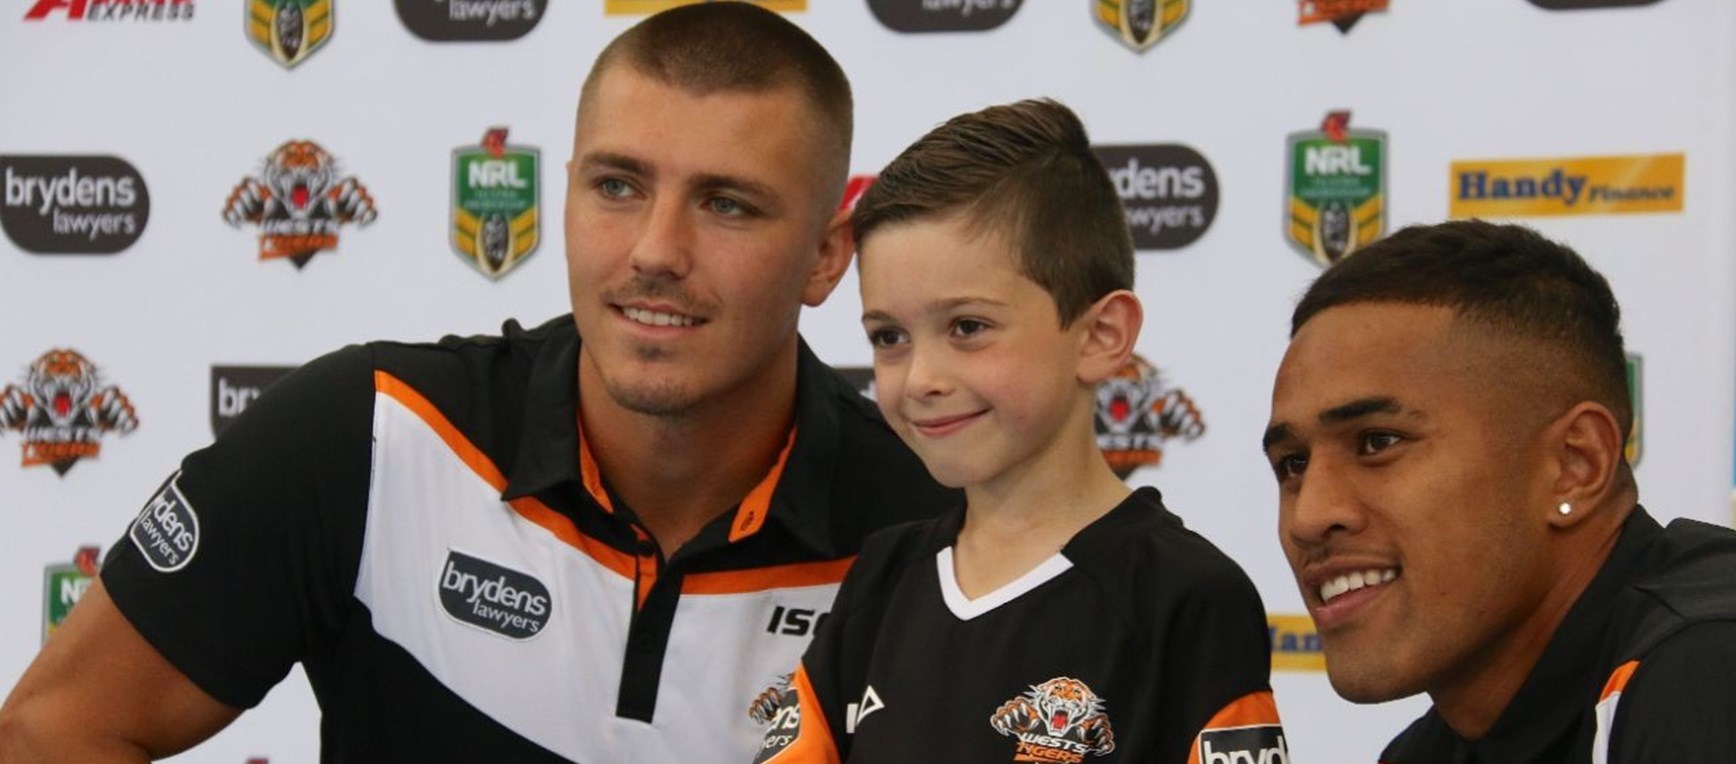 Wests Tigers hold special Disability Event